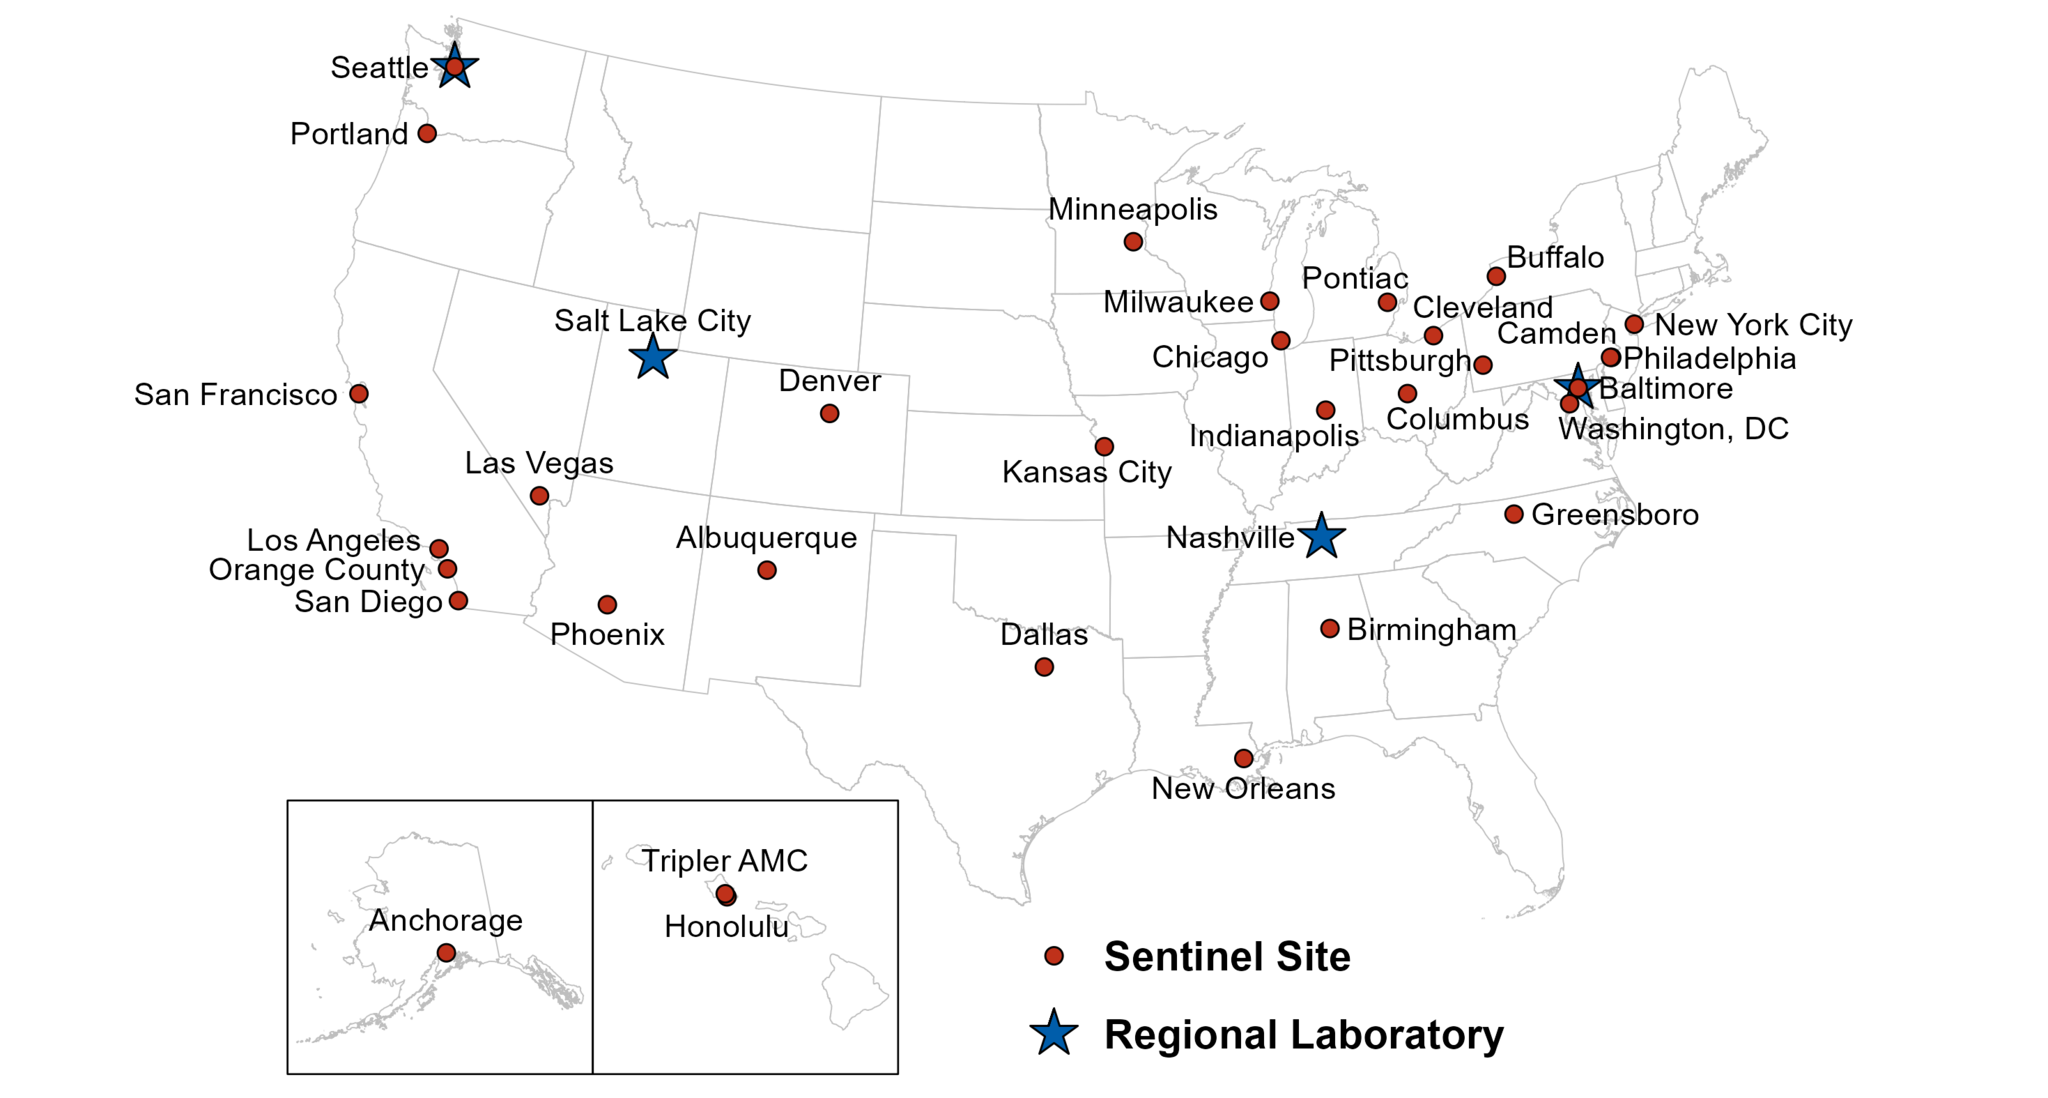 Map showing 2020 GISP clinical sites and regional laboratories